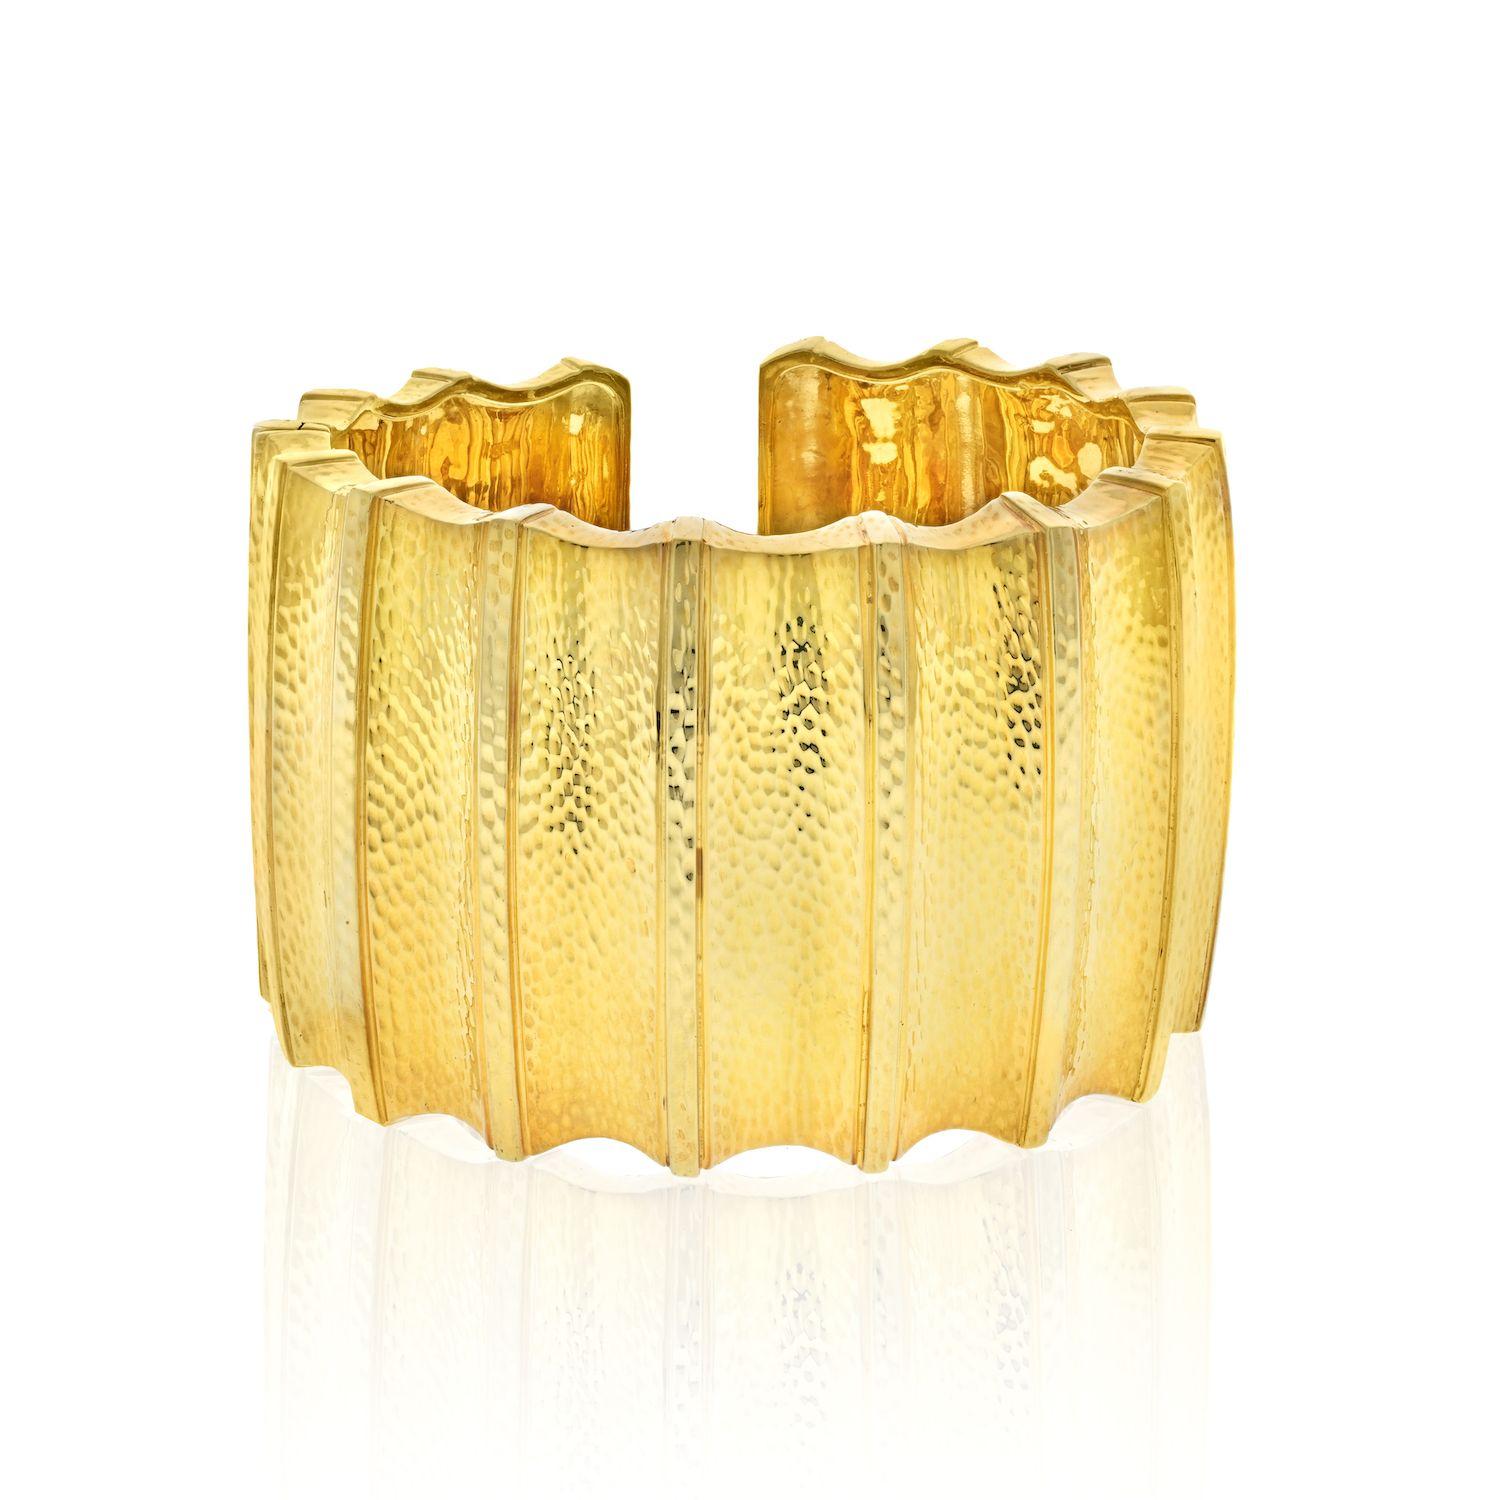 Dress your wrist in this glowing statement maker. The Ridge Cuff from The Ancient World collection by David Webb is an exciting and wearable piece of jewelry. It is a hinged cuff and is easy to open and close. It is anout 2 inches wide and is a